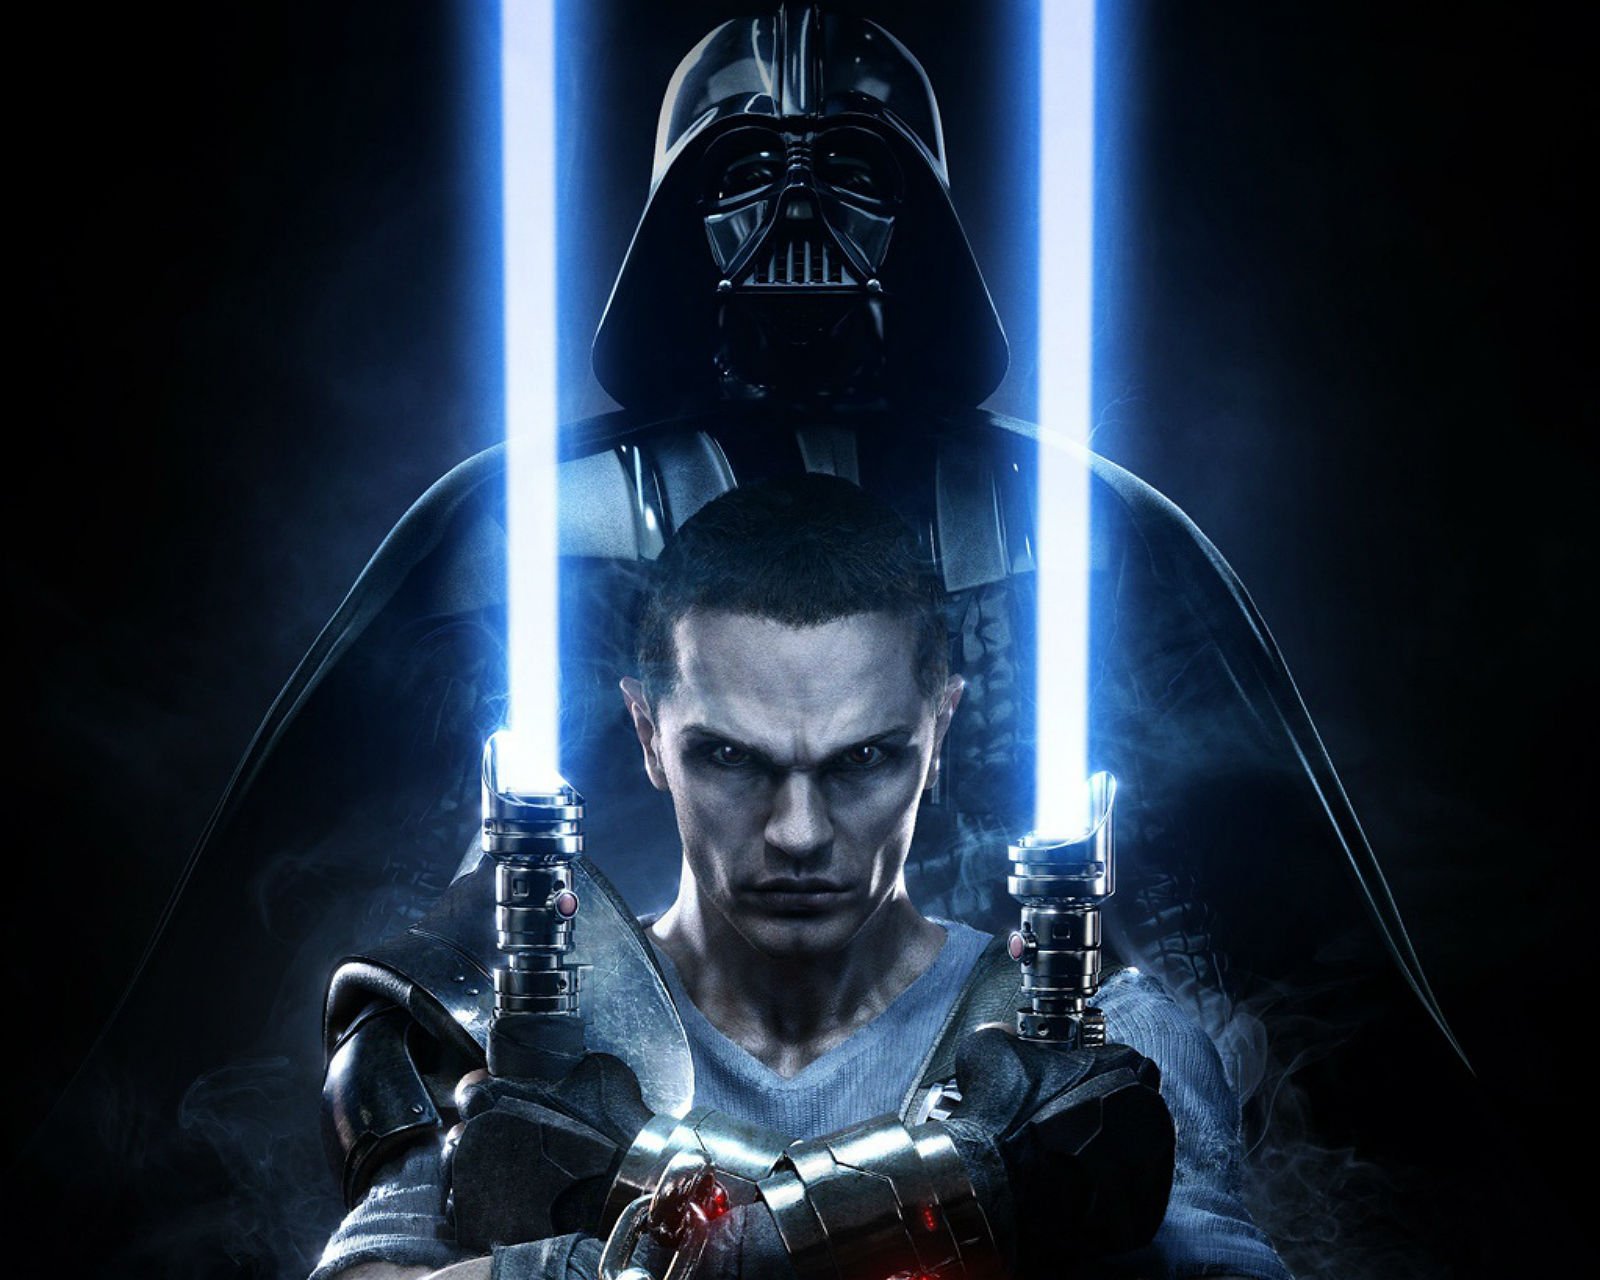 star, Wars, Force, Unleashed, Sci fi, Futuristic, Action, Fighting, Warrior, 1swfu, Darth, Vader, Poster Wallpaper